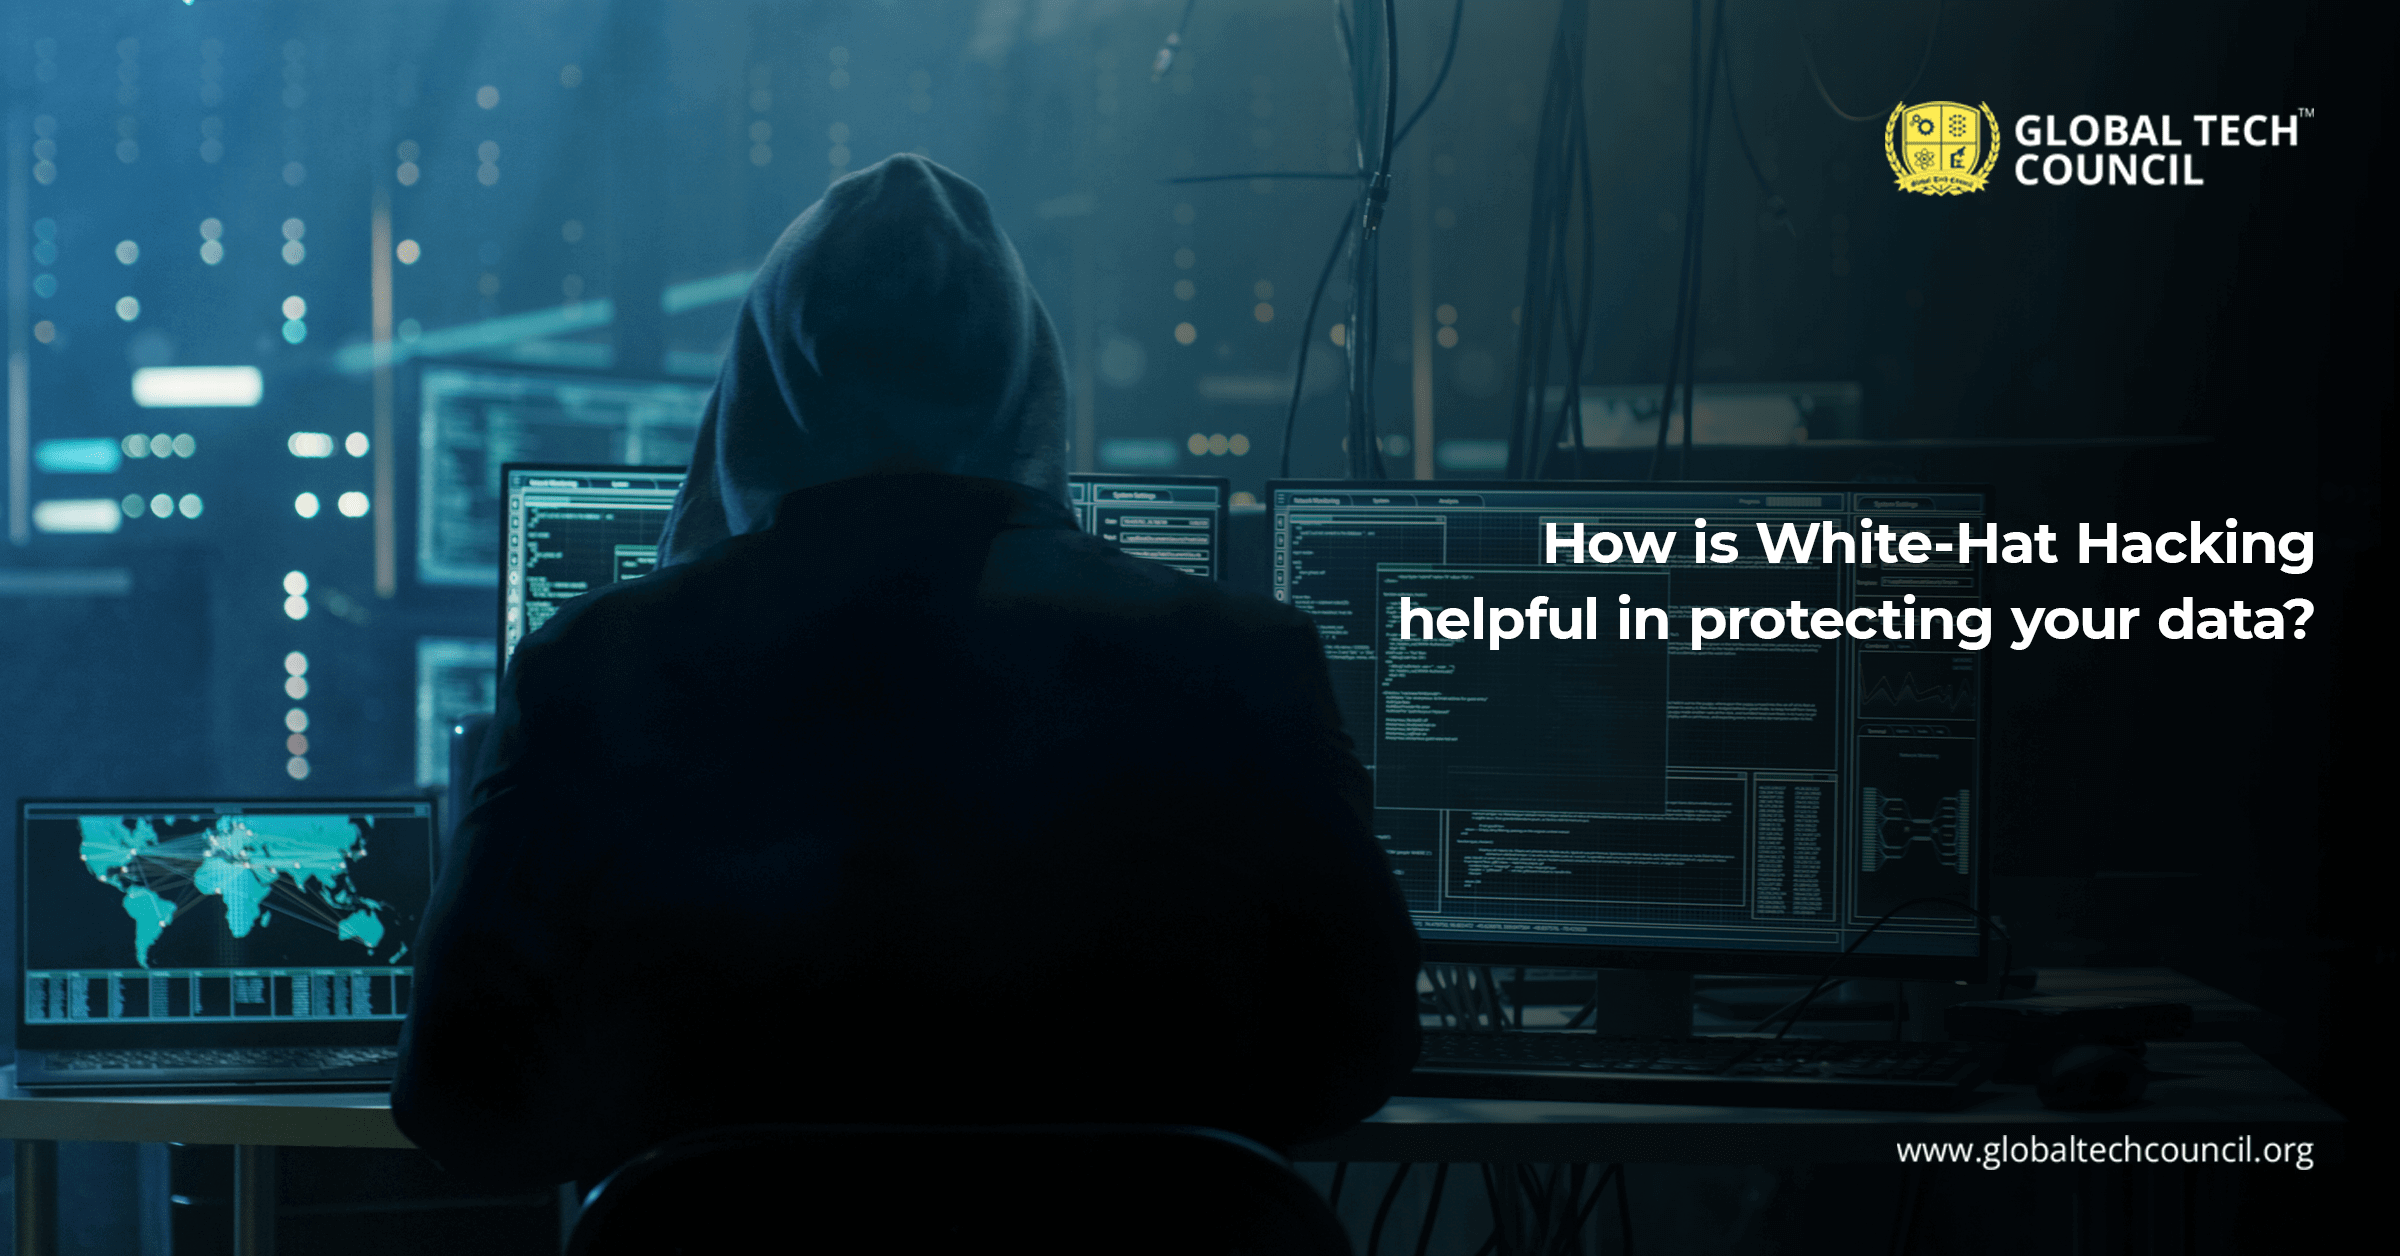 How is White-Hat Hacking helpful in protecting your data